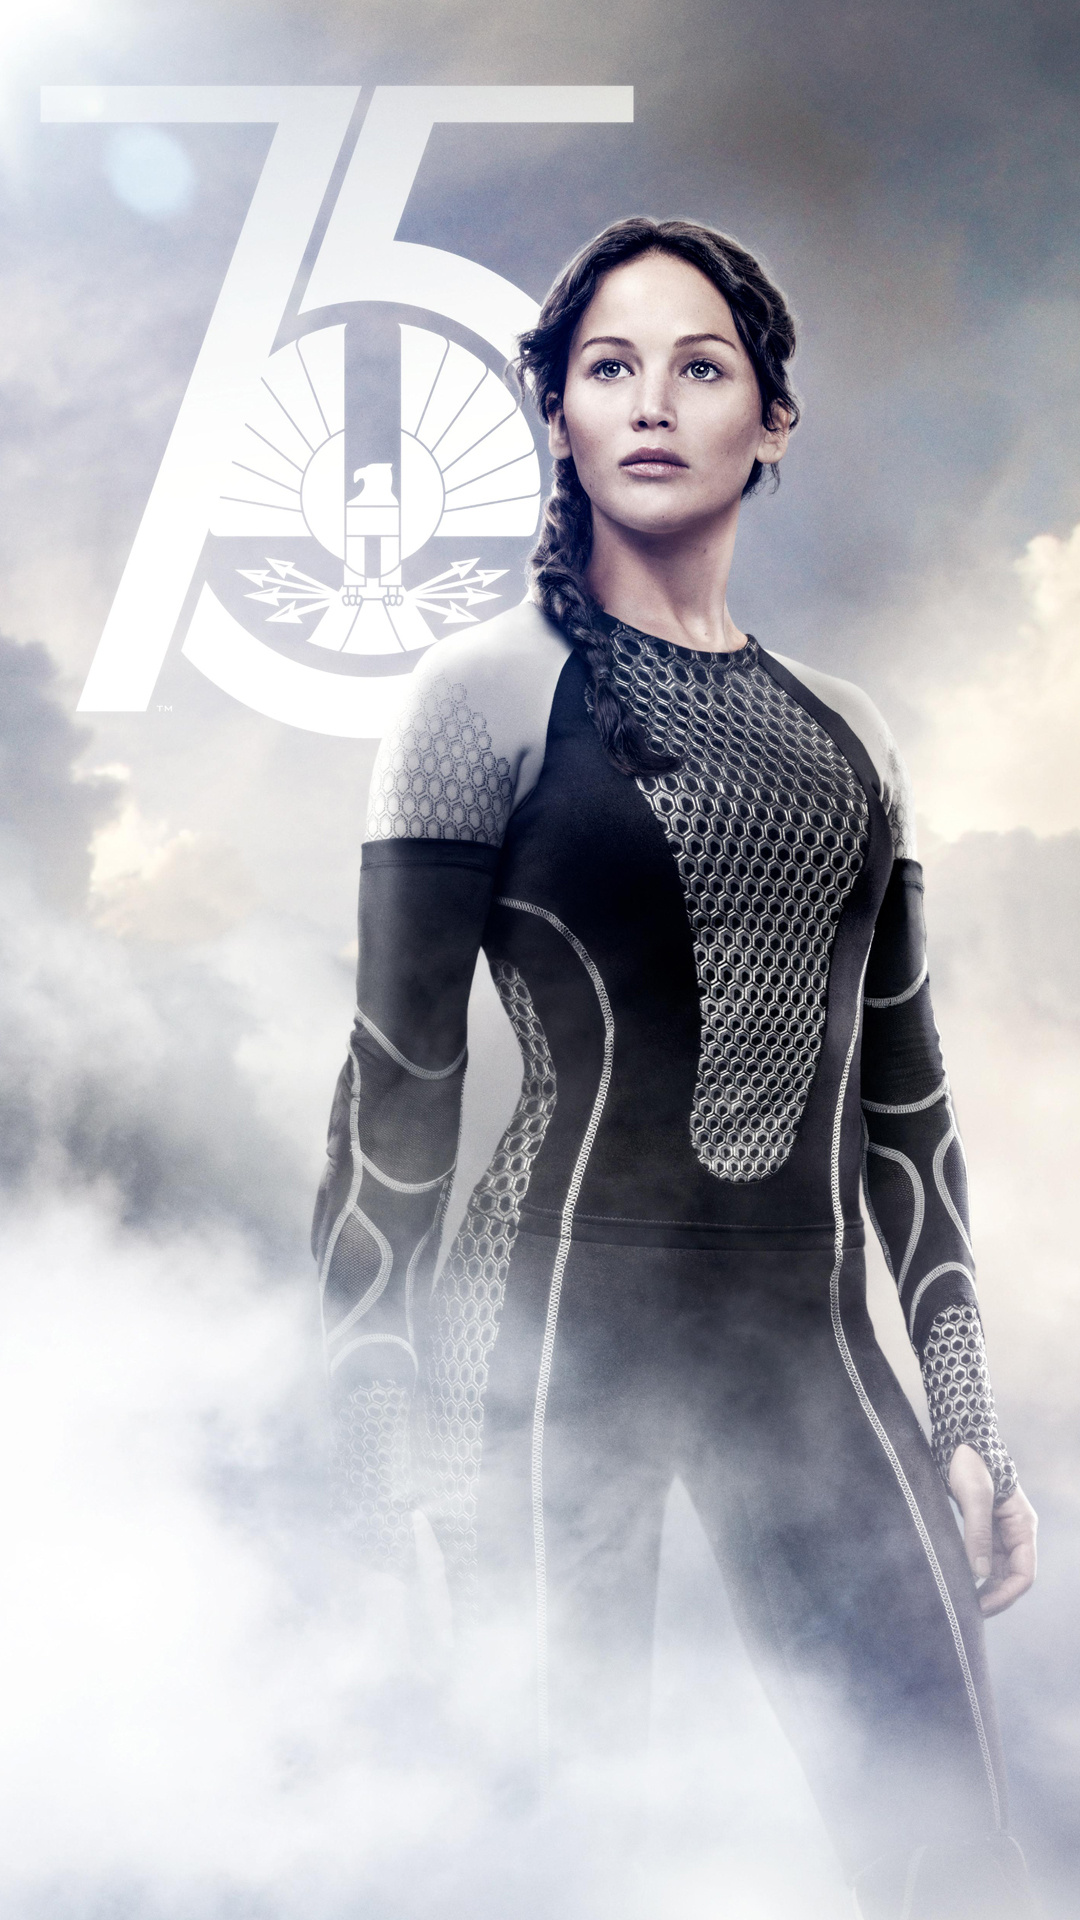 Hunger Games: Catching Fire, The fifth-highest-grossing film of 2013. 1080x1920 Full HD Wallpaper.